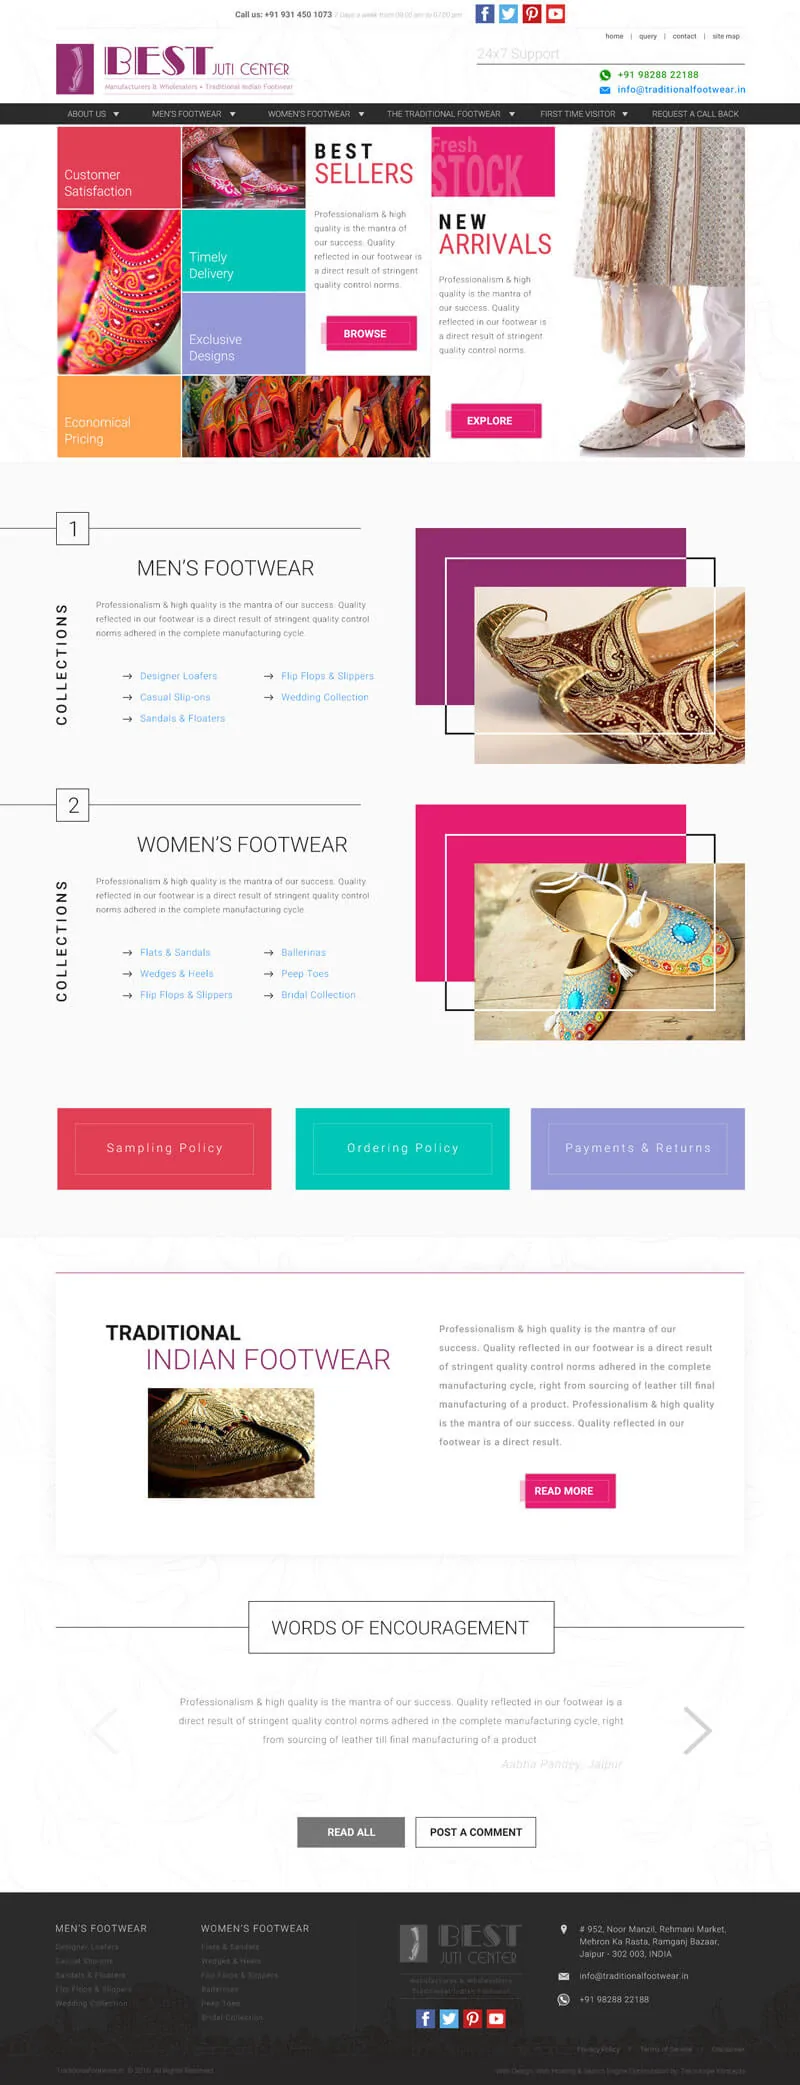 Static Content Website Yet Dynamic Feel - TraditionalFootwear.in